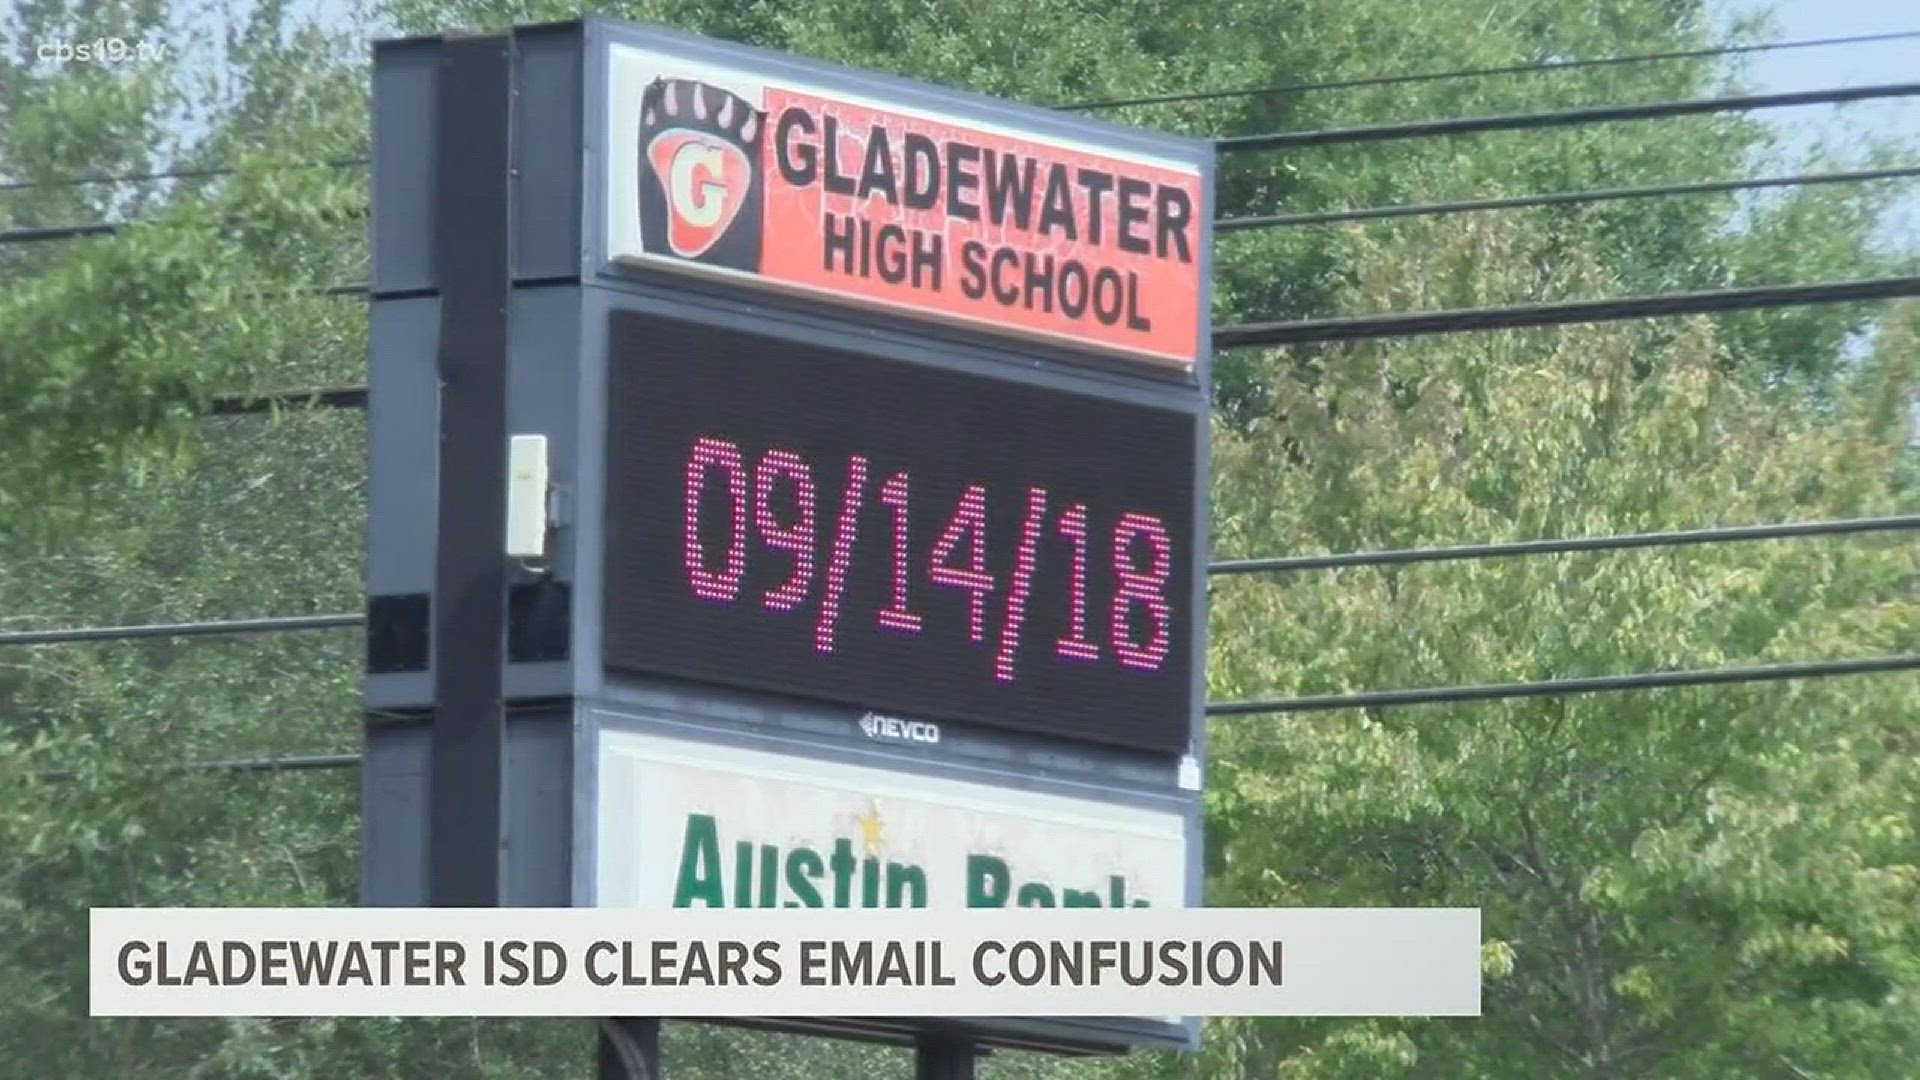 After hearing about the frustrations of several parents, Superintendent Sedric Clark of Gladewater ISD is hoping to clear any confusion about emails sent targeting the district's high school.